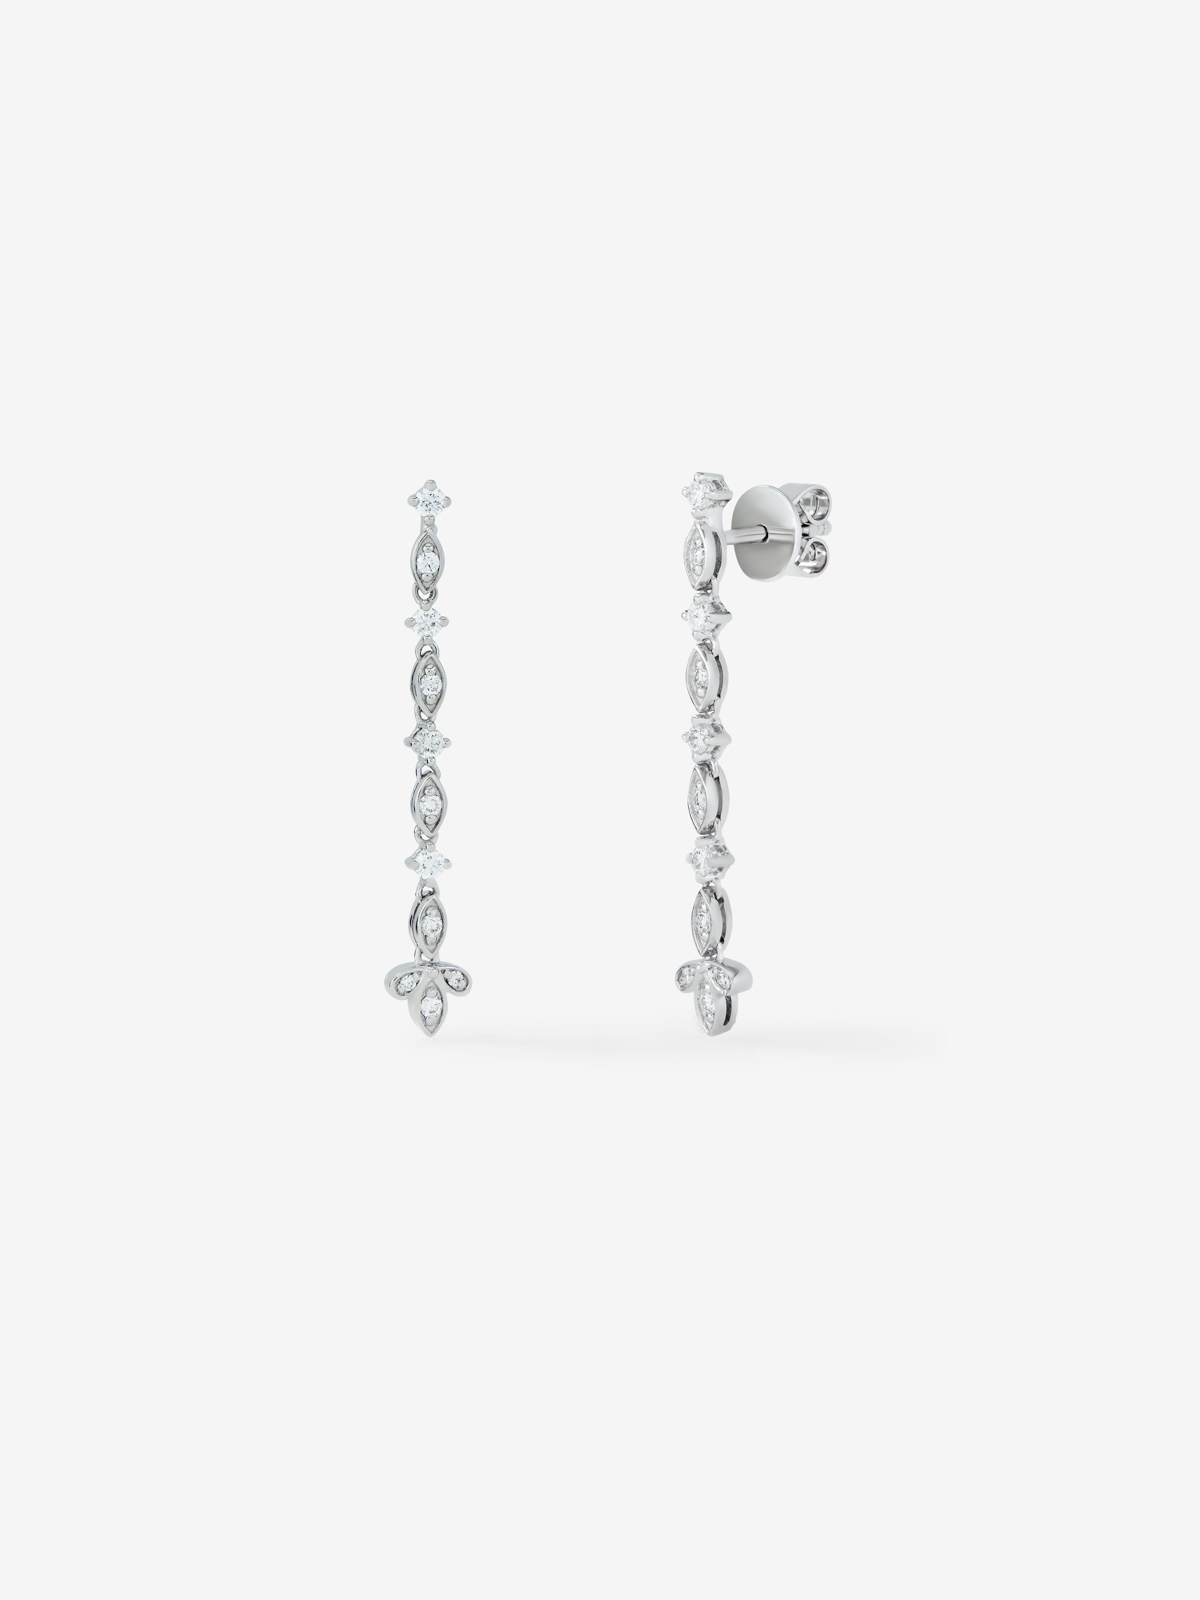 Long-hanging earrings in 18K white gold and diamond